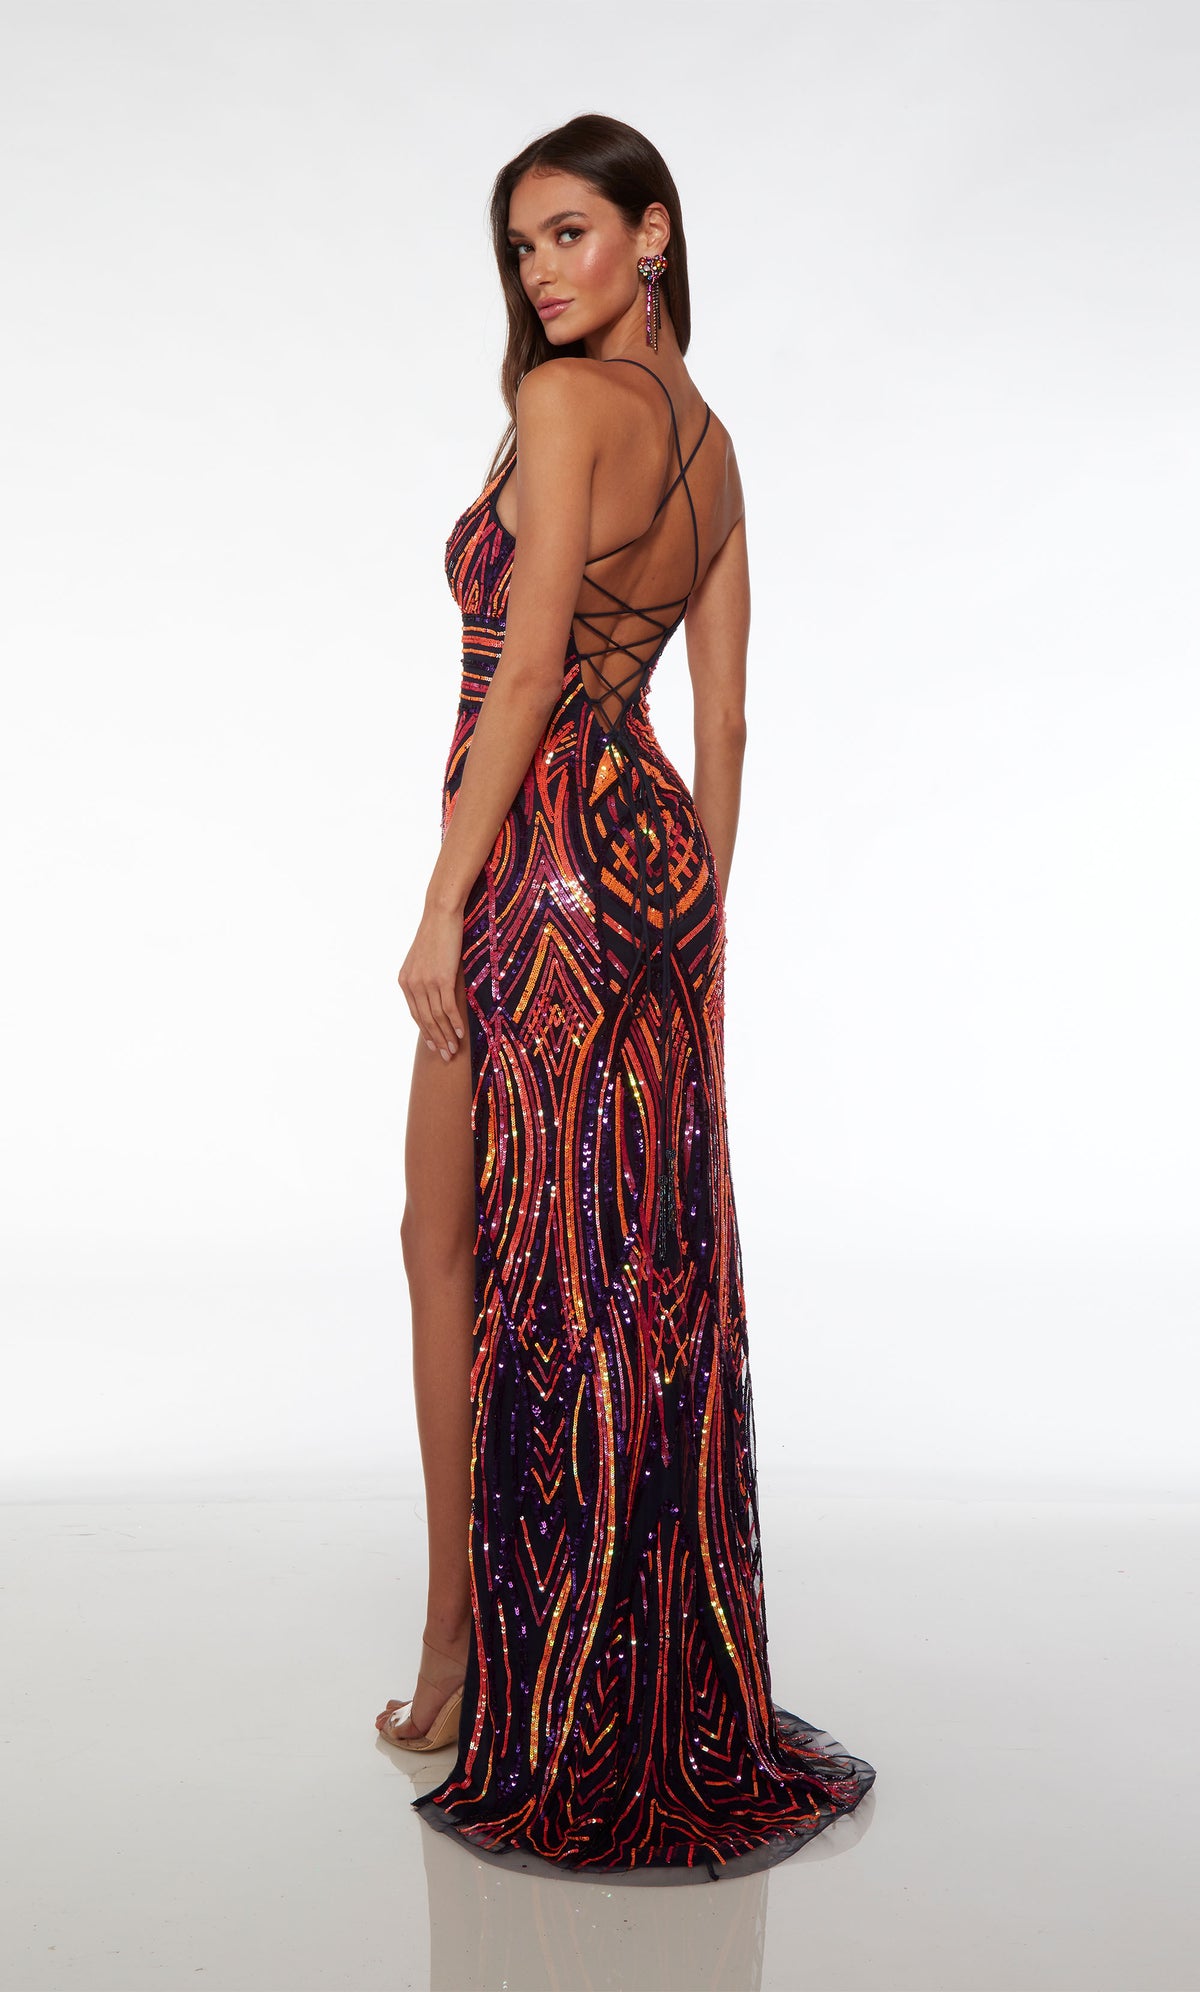 Exquisite hand-beaded formal dress in midnight-multi: V neckline, high side slit, crisscross strappy back, and an slight train for an touch of elegance.